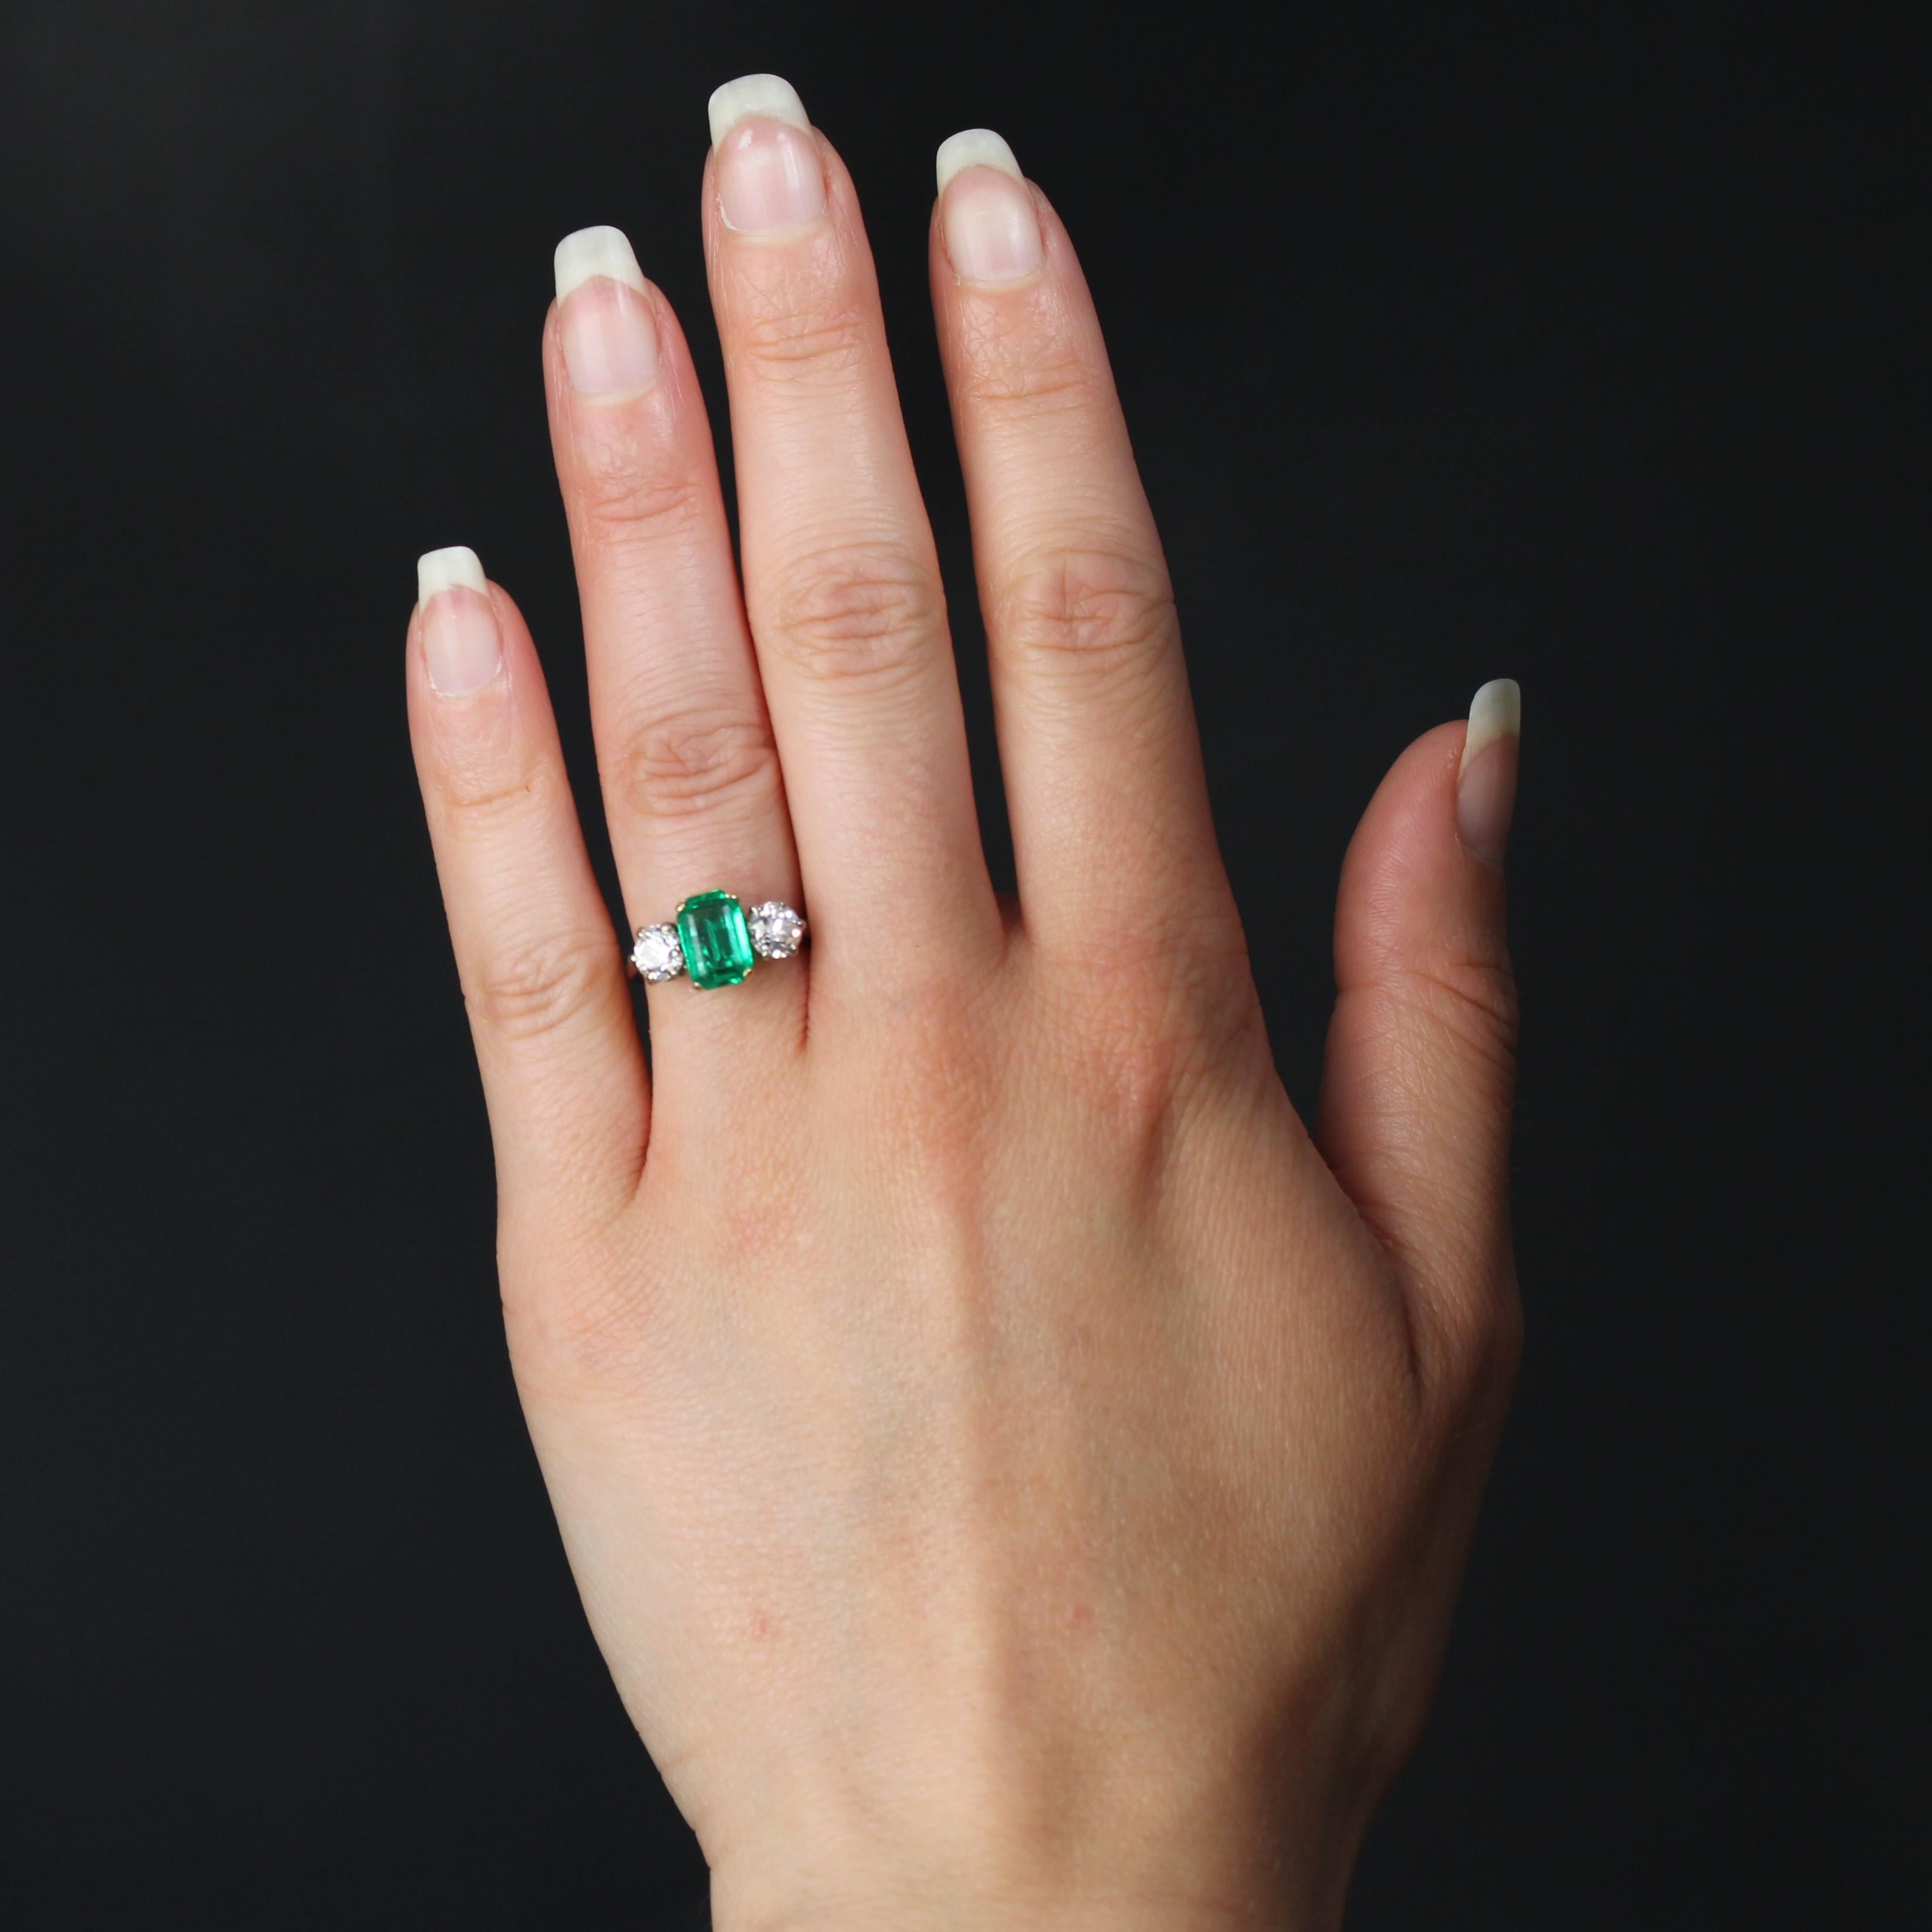 Ring in 18 karat white and yellow gold, owl hallmark.
It is decorated on its top with an degrees- cut emerald retained with 4 claws and shouldered on both sides of 2 antique brilliant- cut diamonds, also retained with claws. The profile is